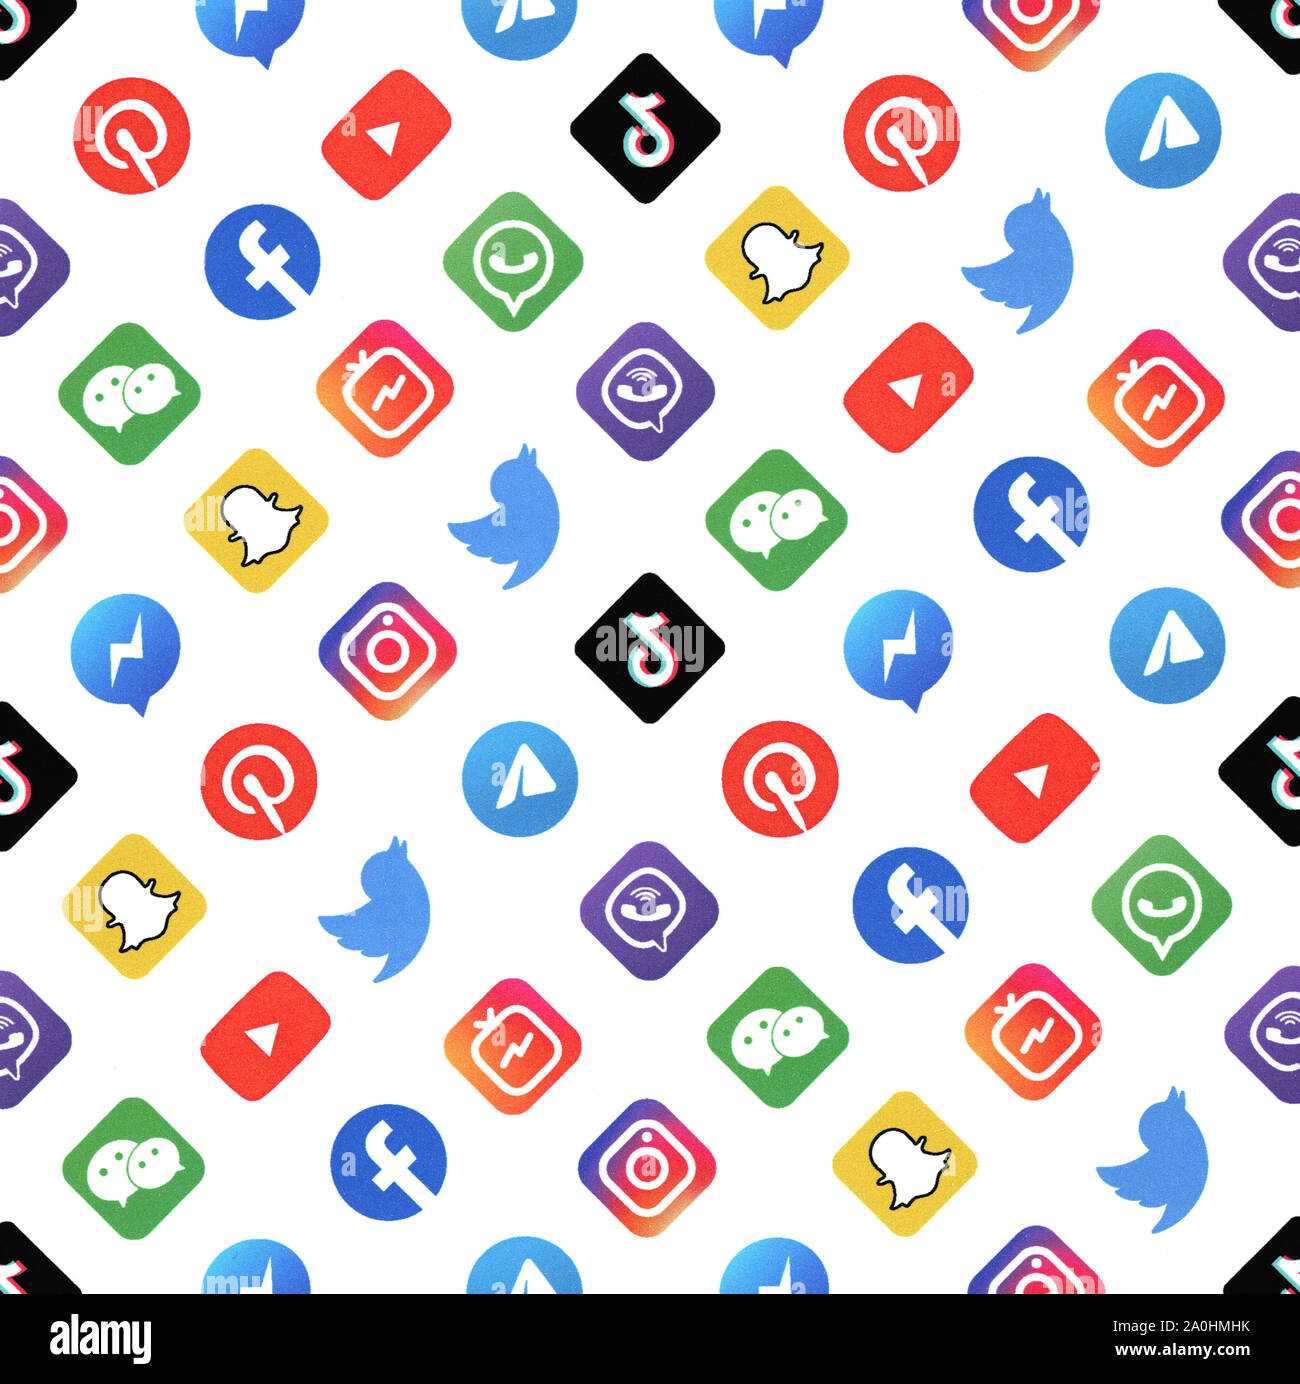 Kyiv, Ukraine - September 20, 2019: Close-up shot of paper with printed logotypes pattern of well-known social media brands. Stock Photo